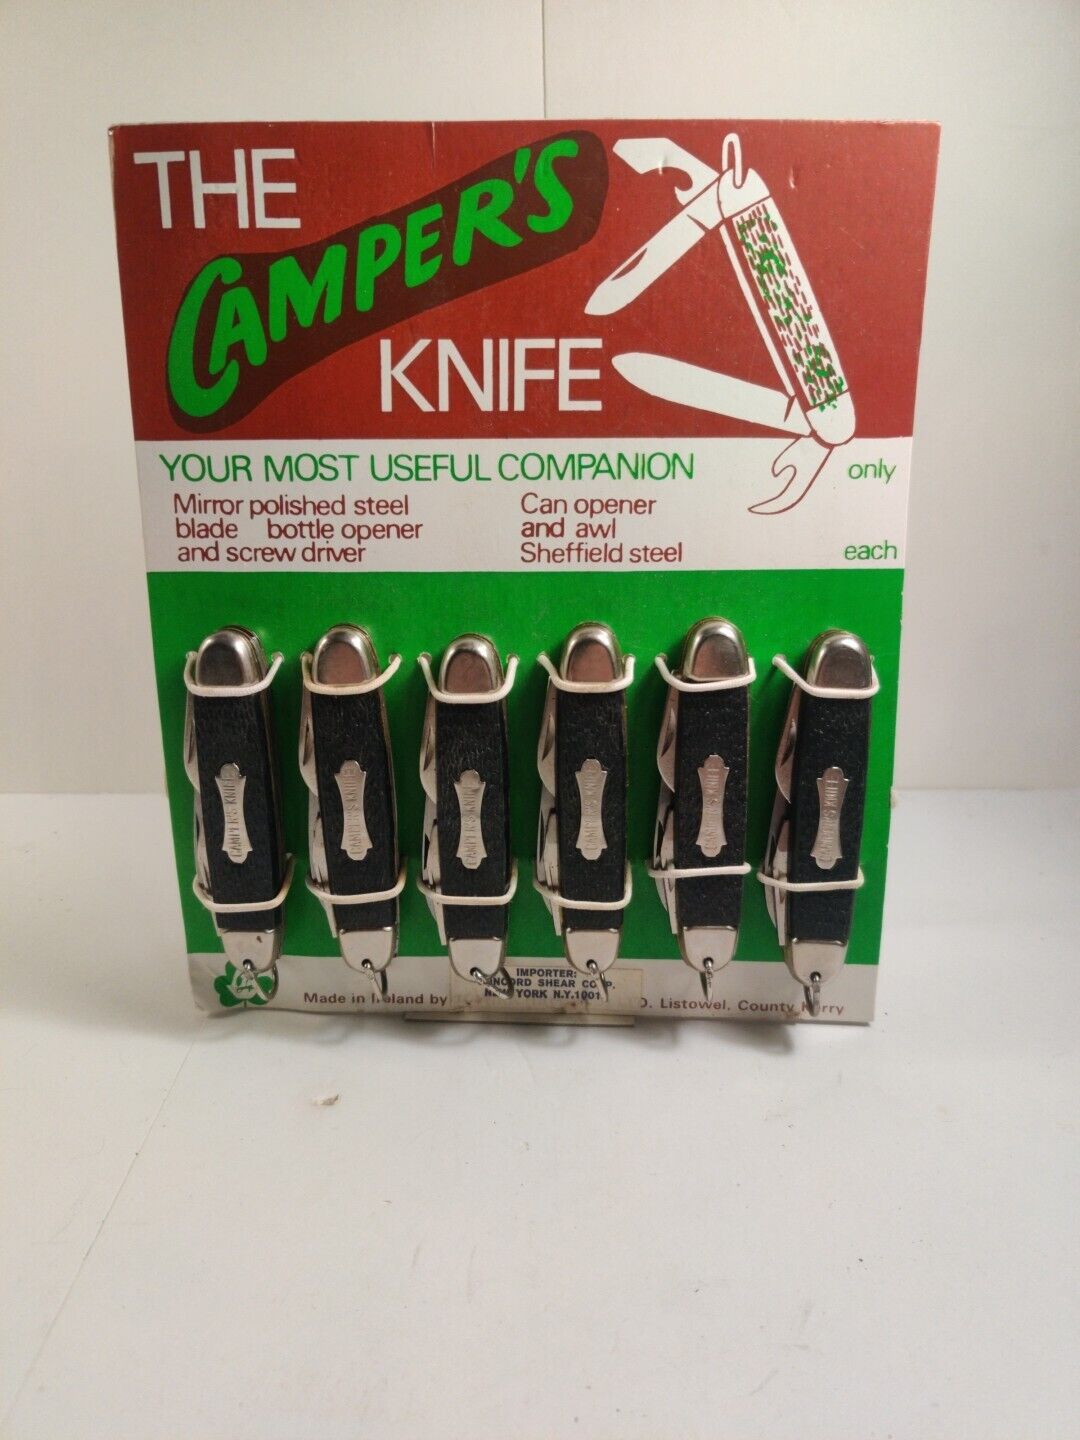 1960’s NOS THE CAMPER'S KNIFE Double Sided STORE DISPLAY With 12 Unused Knives